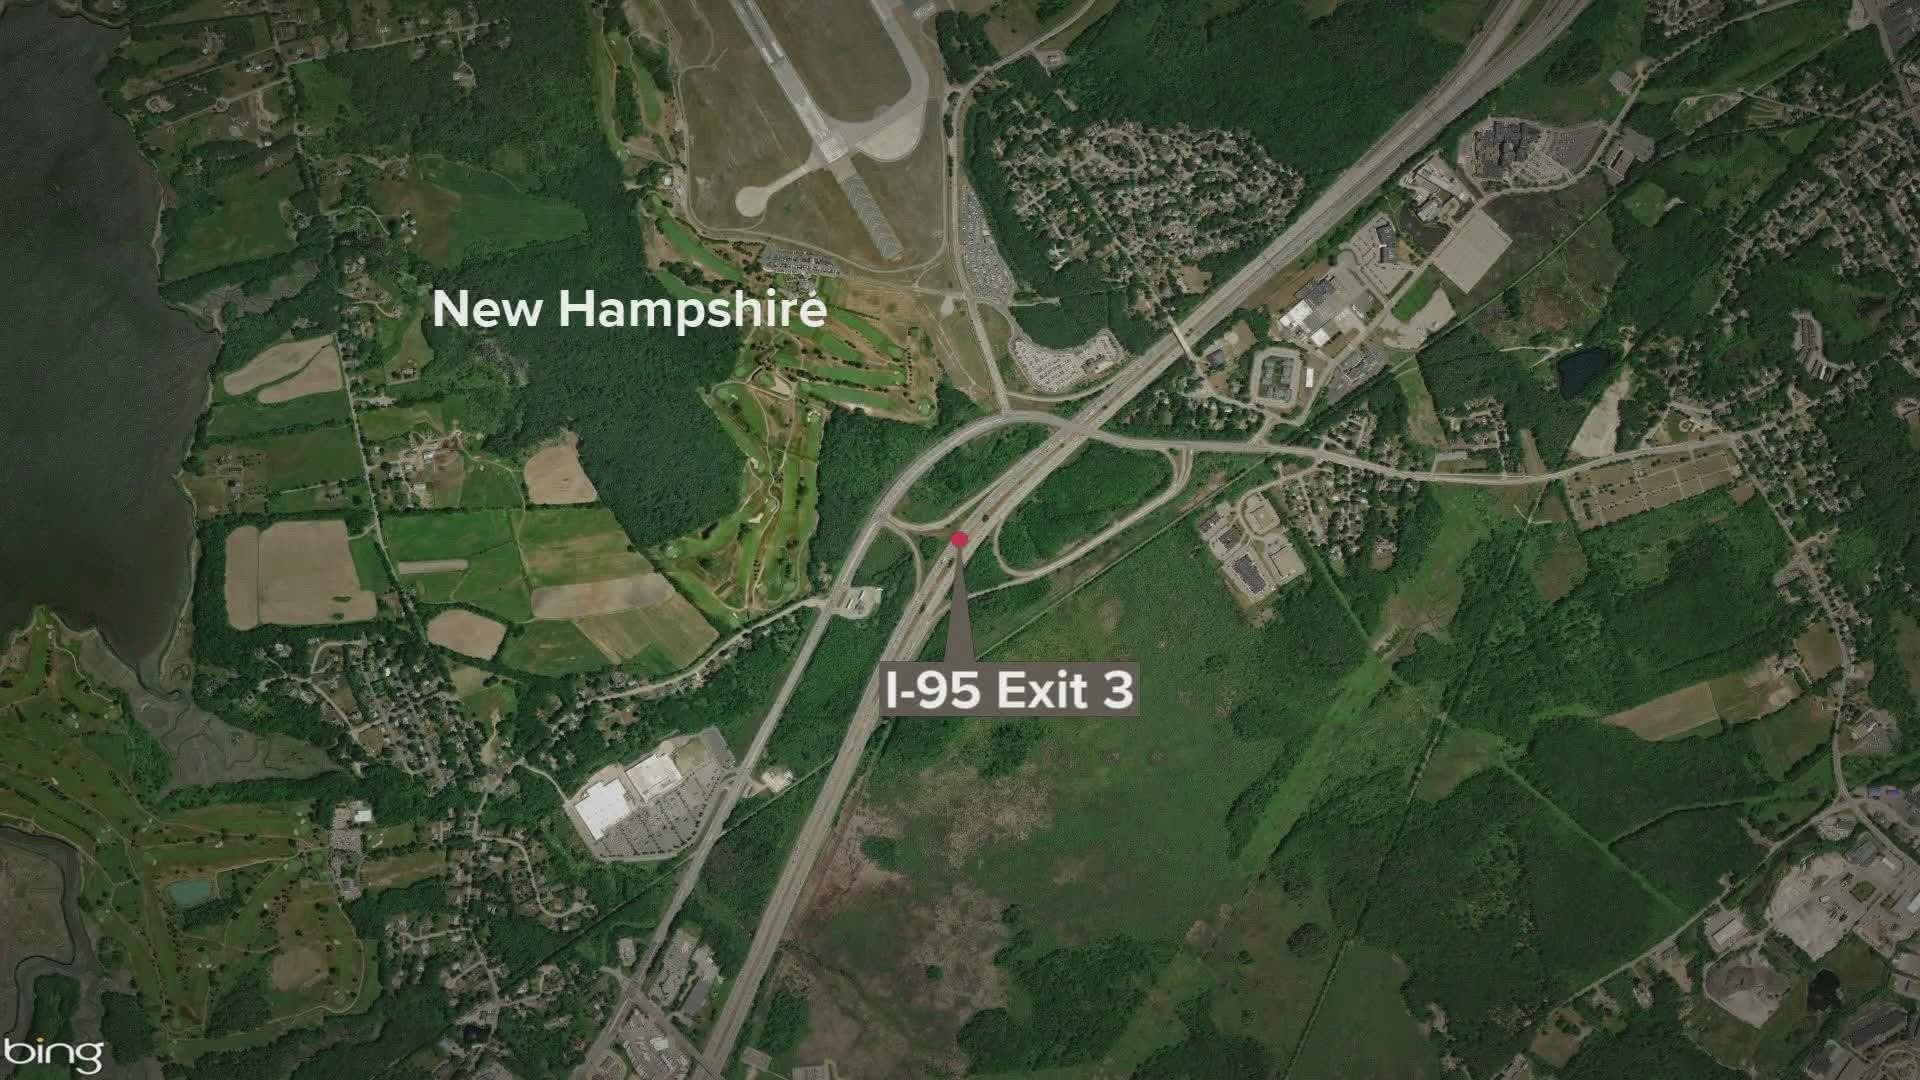 According to New Hampshire officials, Staff Sergeant Jesse Sherrill was killed early Thursday morning in a crash on I-95 in Portsmouth.